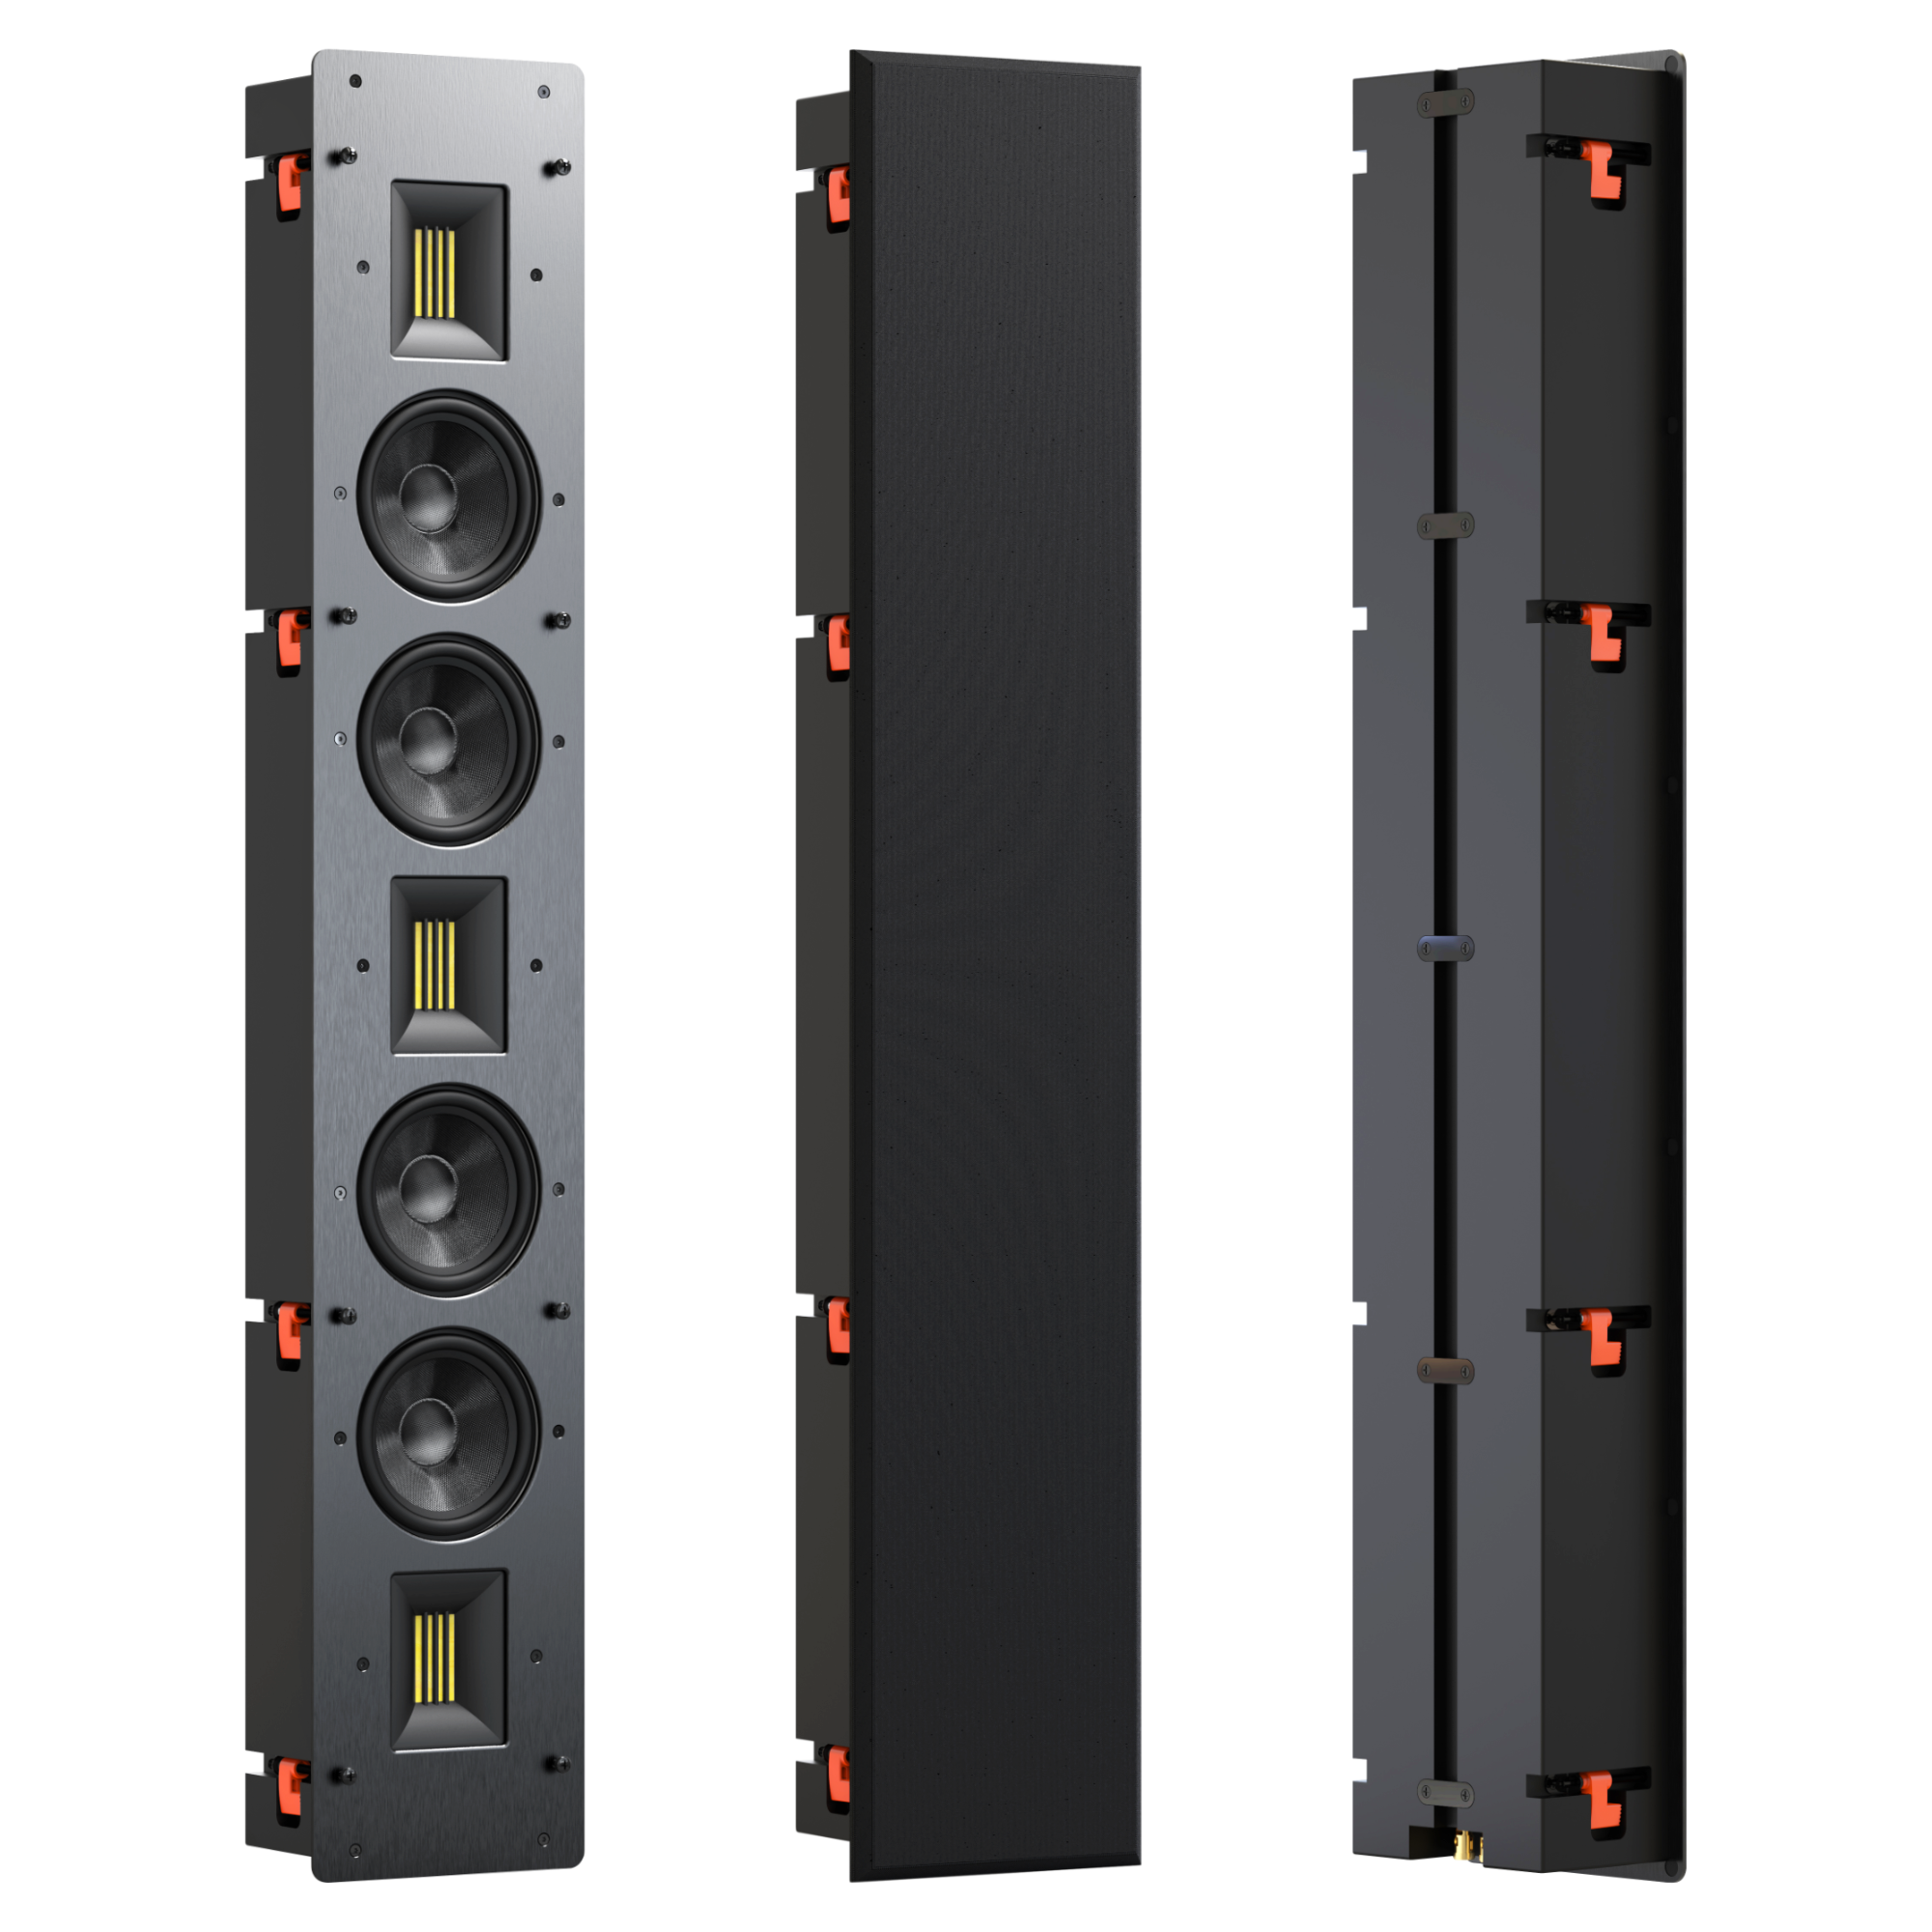 The Earthquake IW-4503 Line Array LCR Speaker is used for in-wall home theater applications that serves as a left, right, center, and surround sound channels.